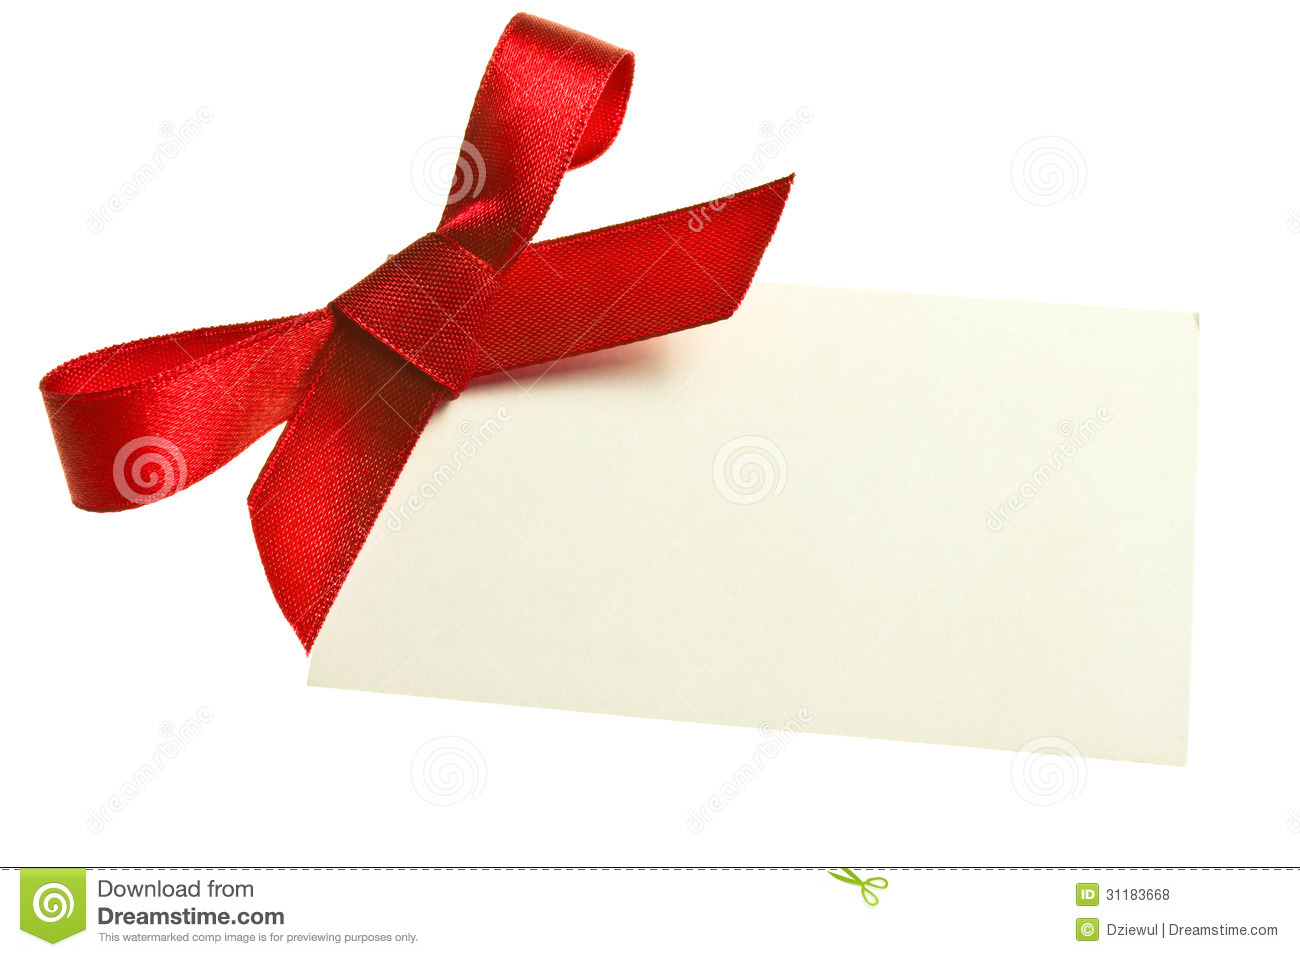 Royalty Free Stock Photos  Blank Gift Tag Tied With A Bow Of Red Satin